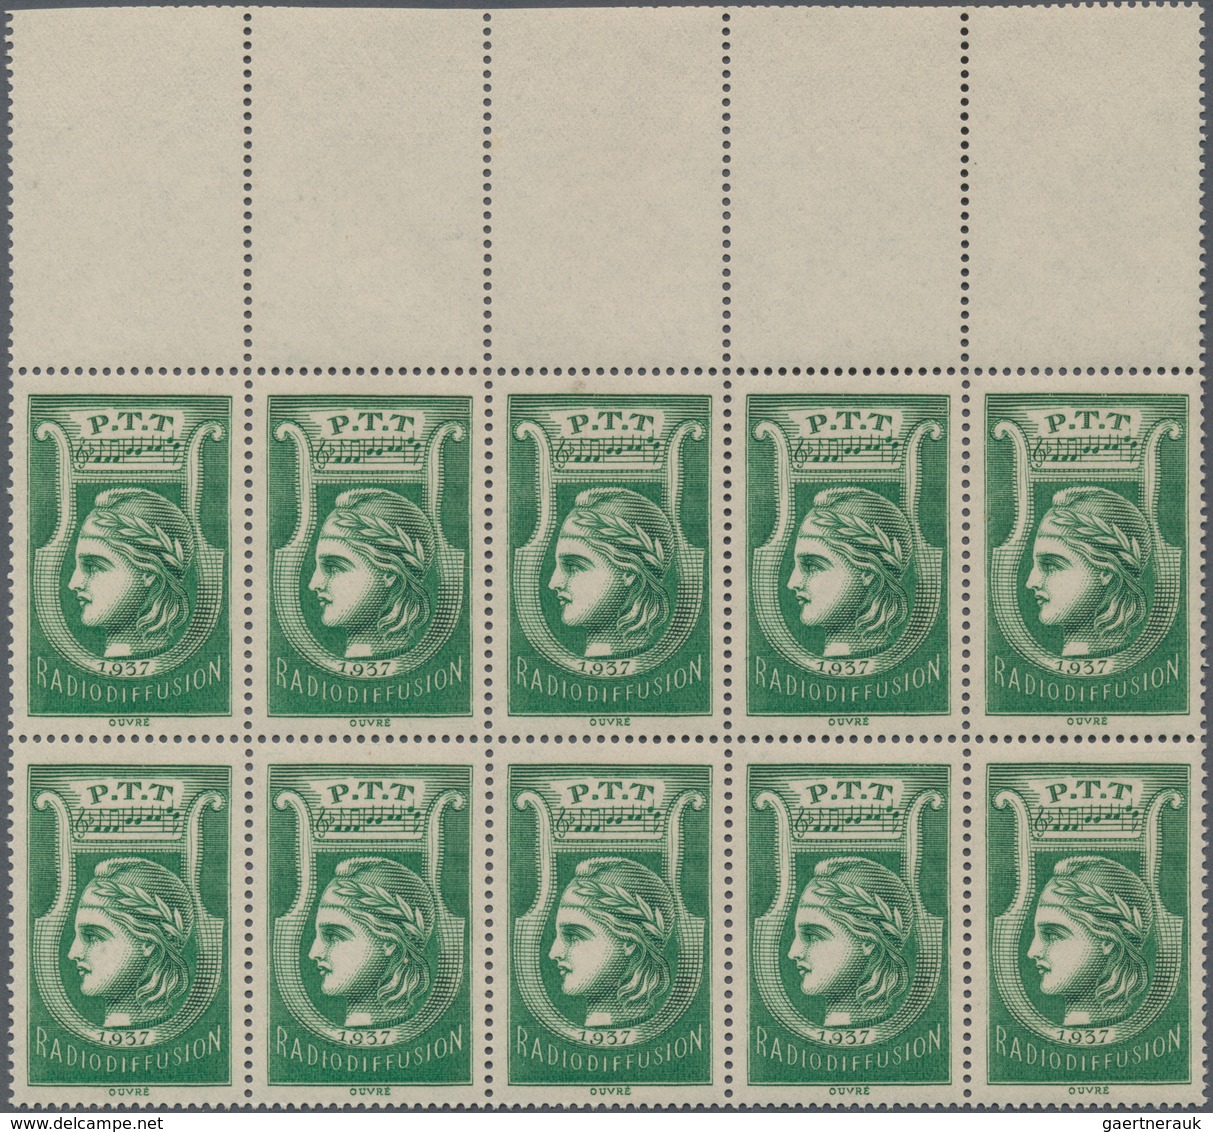 Frankreich - Portomarken: 1937, Radiodiffusion Stamp In Green, Lot Of 100 Stamps Within Multiples, M - 1960-.... Oblitérés